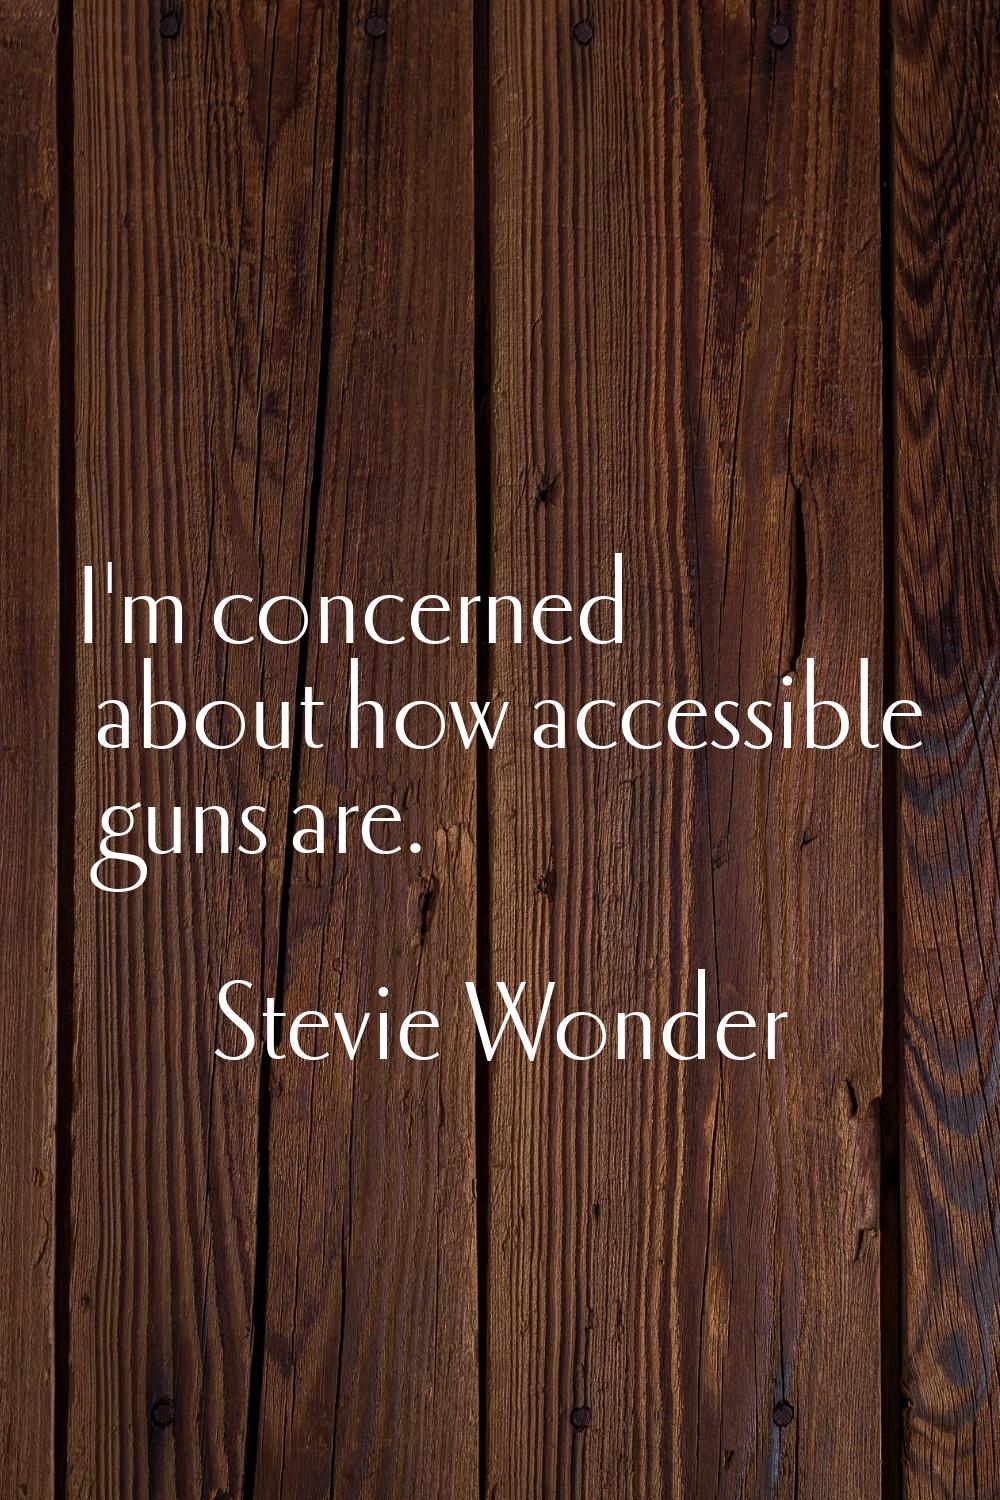 I'm concerned about how accessible guns are.